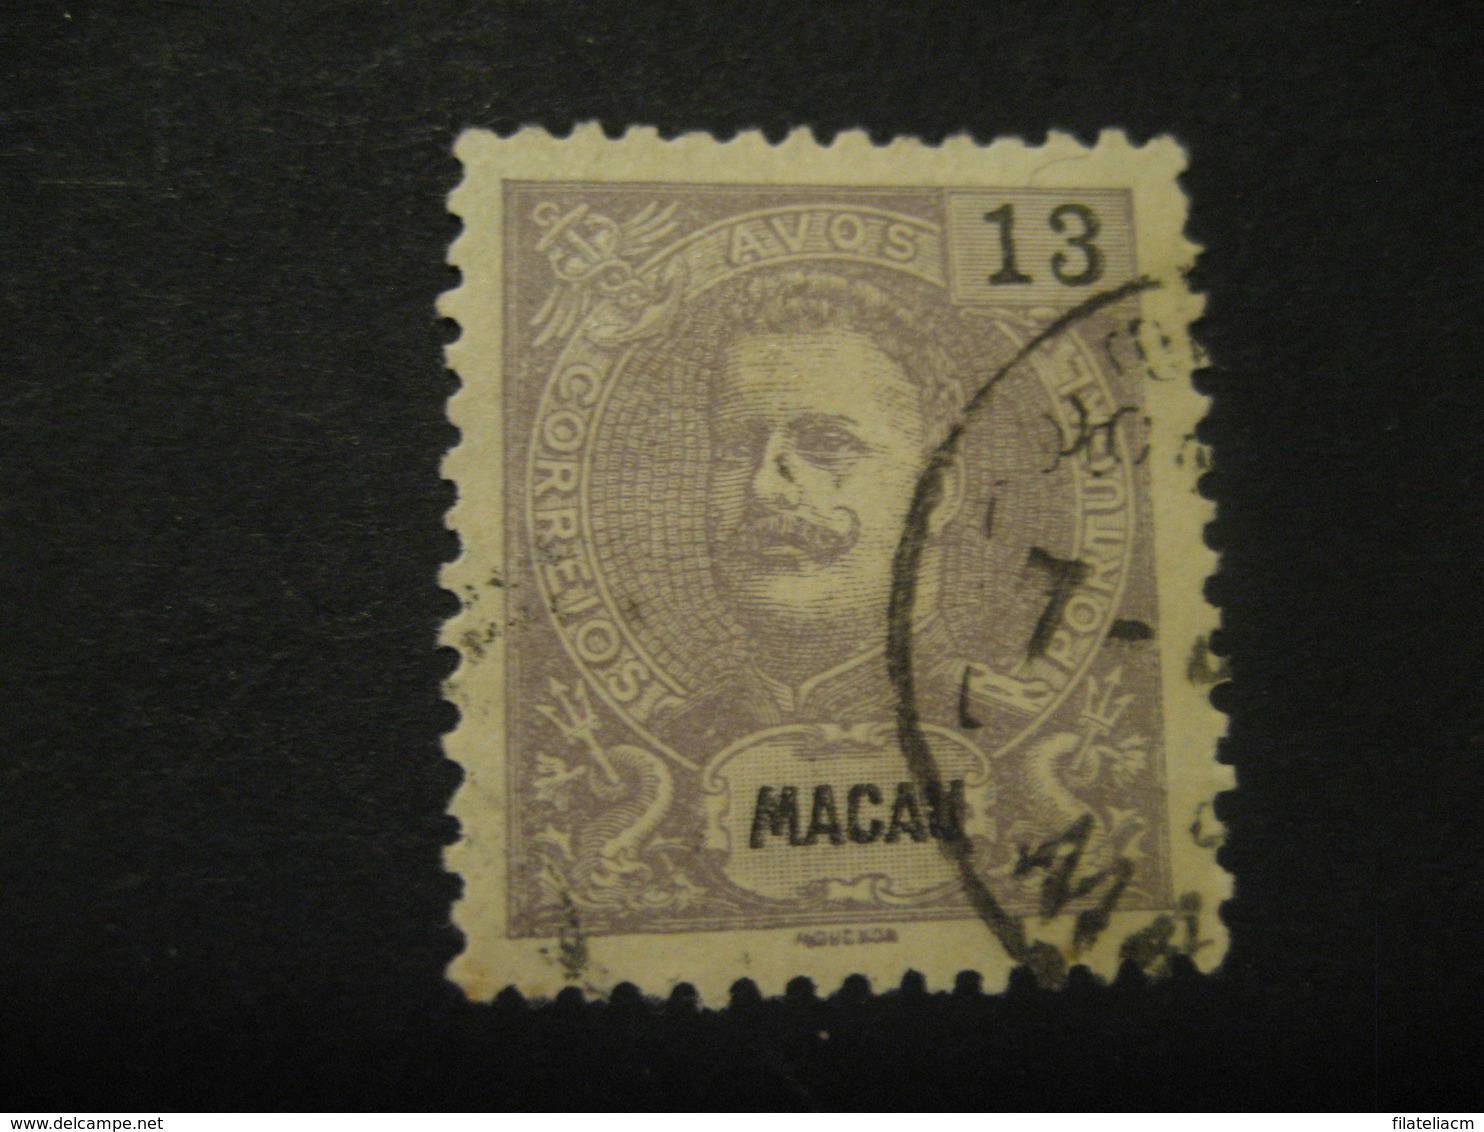 13 Avos MACAU 1903/5 Yvert 136 (Cat. Year 2008: 9 Eur) Stamp Macao Portugal China Area - Oblitérés